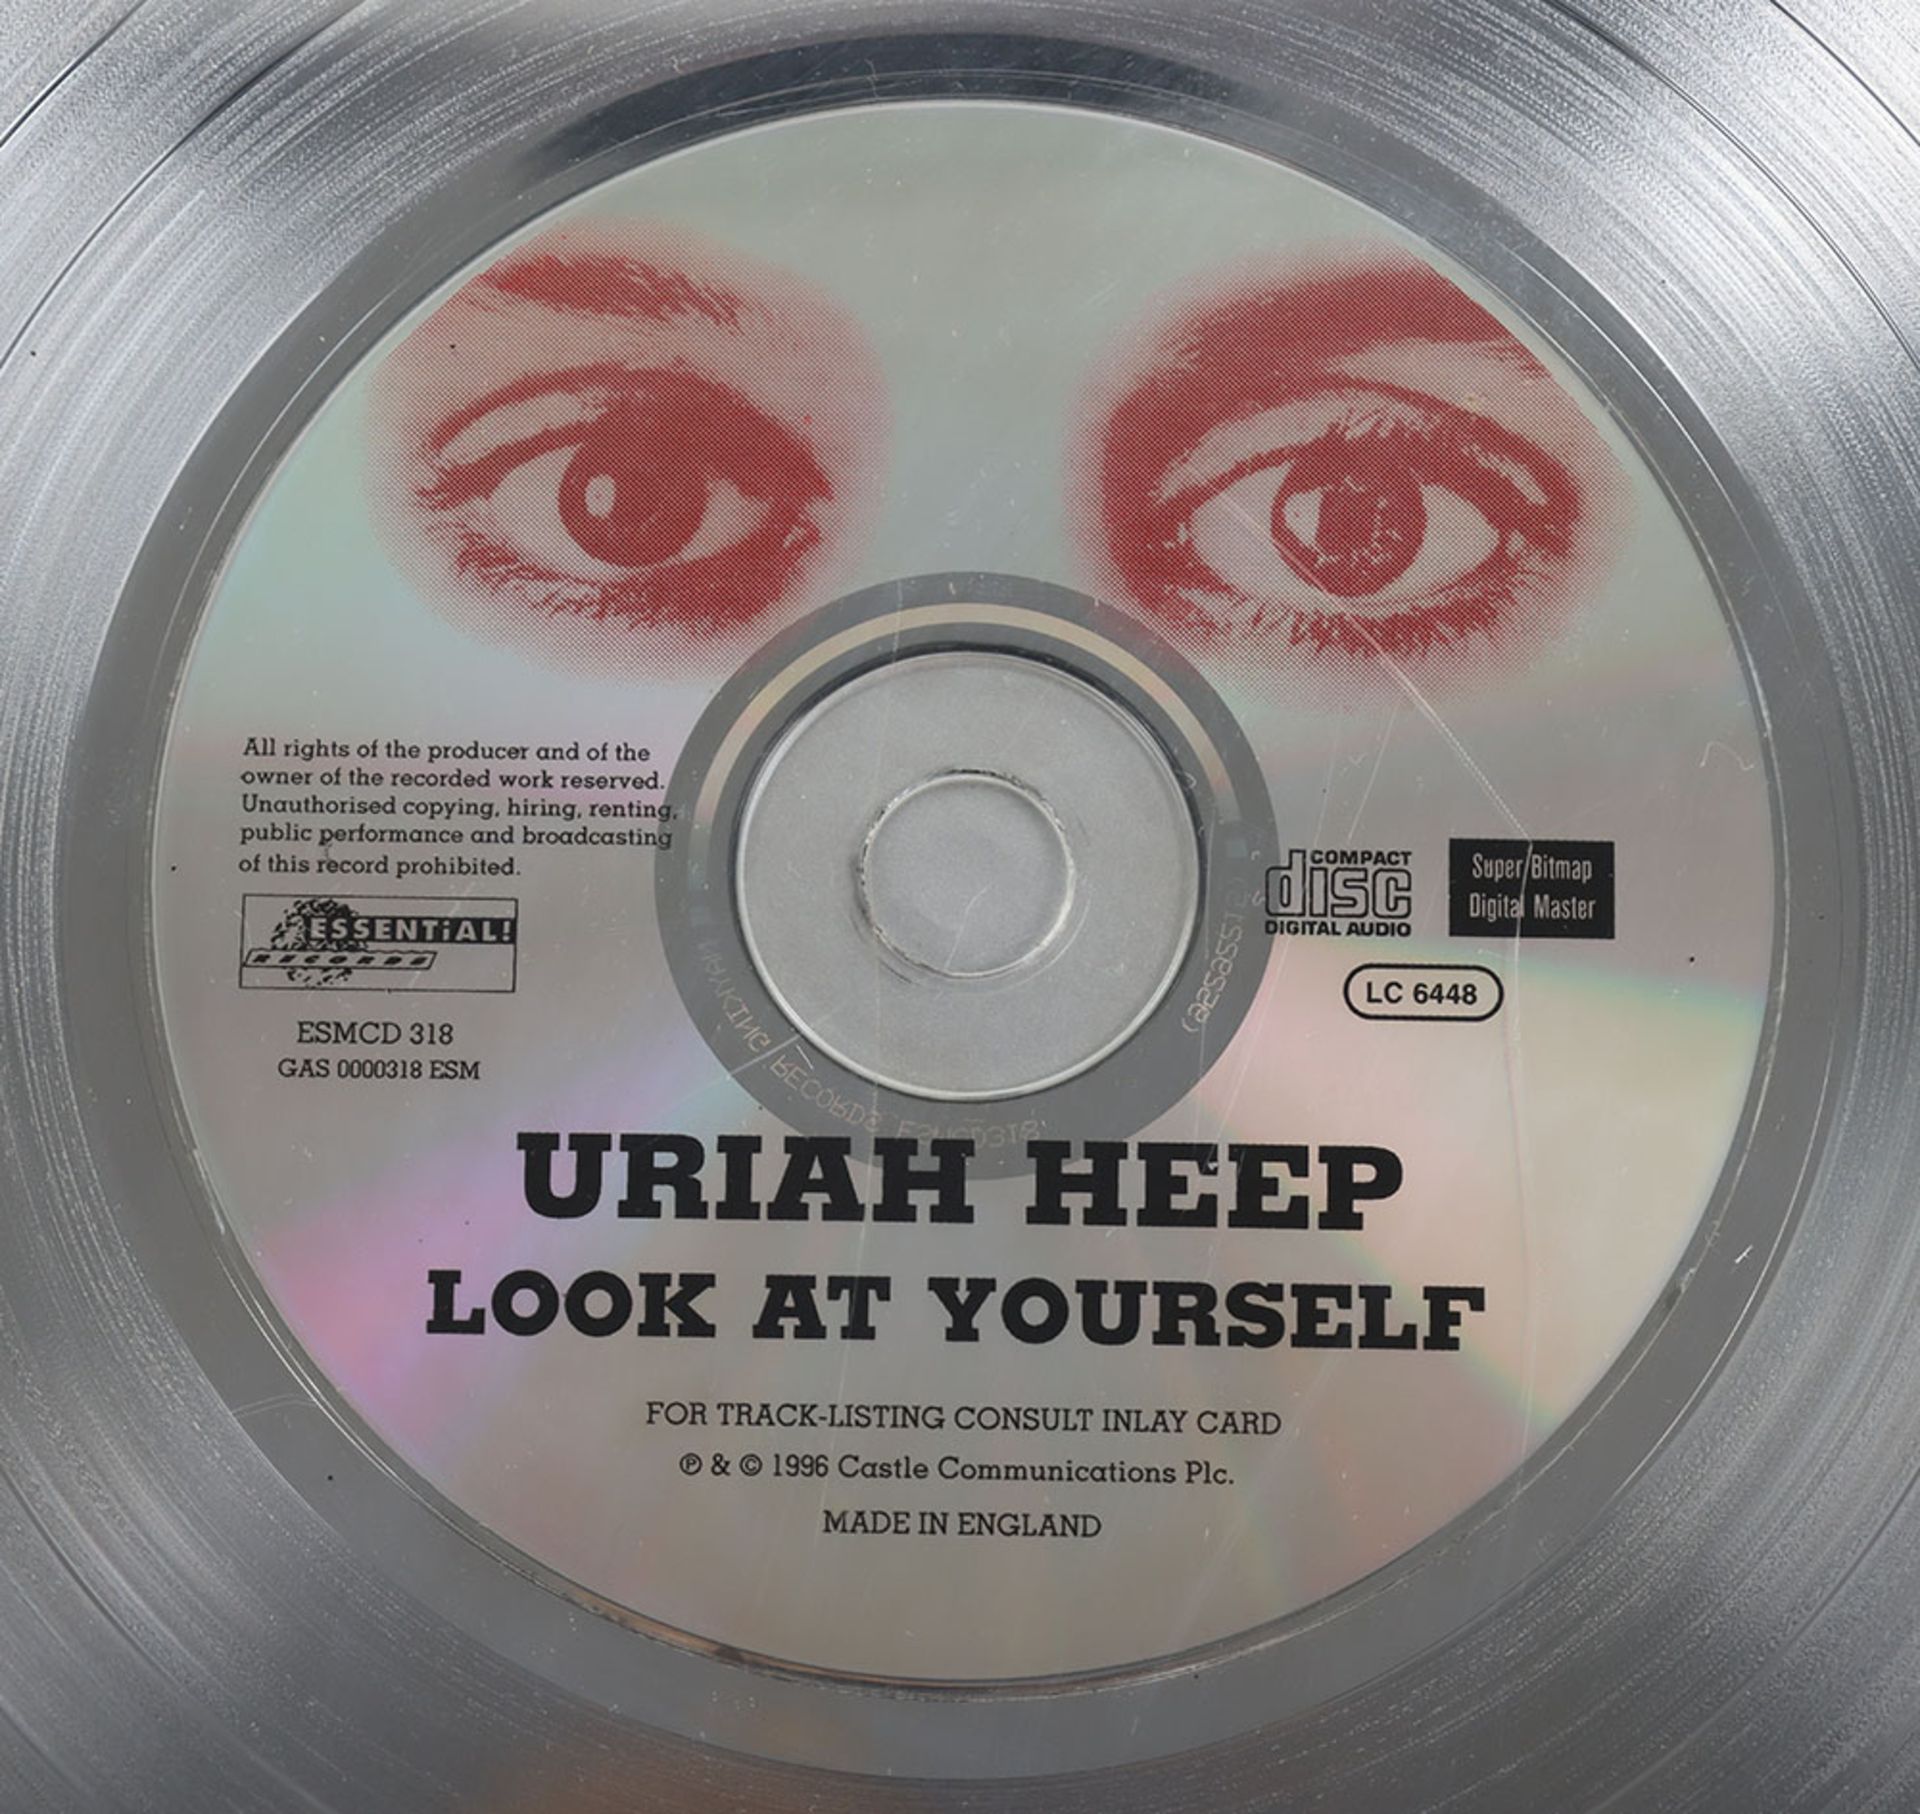 Uriah Heep Platinum Disc Look At Yourself Limited Edition In Recognition of Worldwide Sales - Image 5 of 9